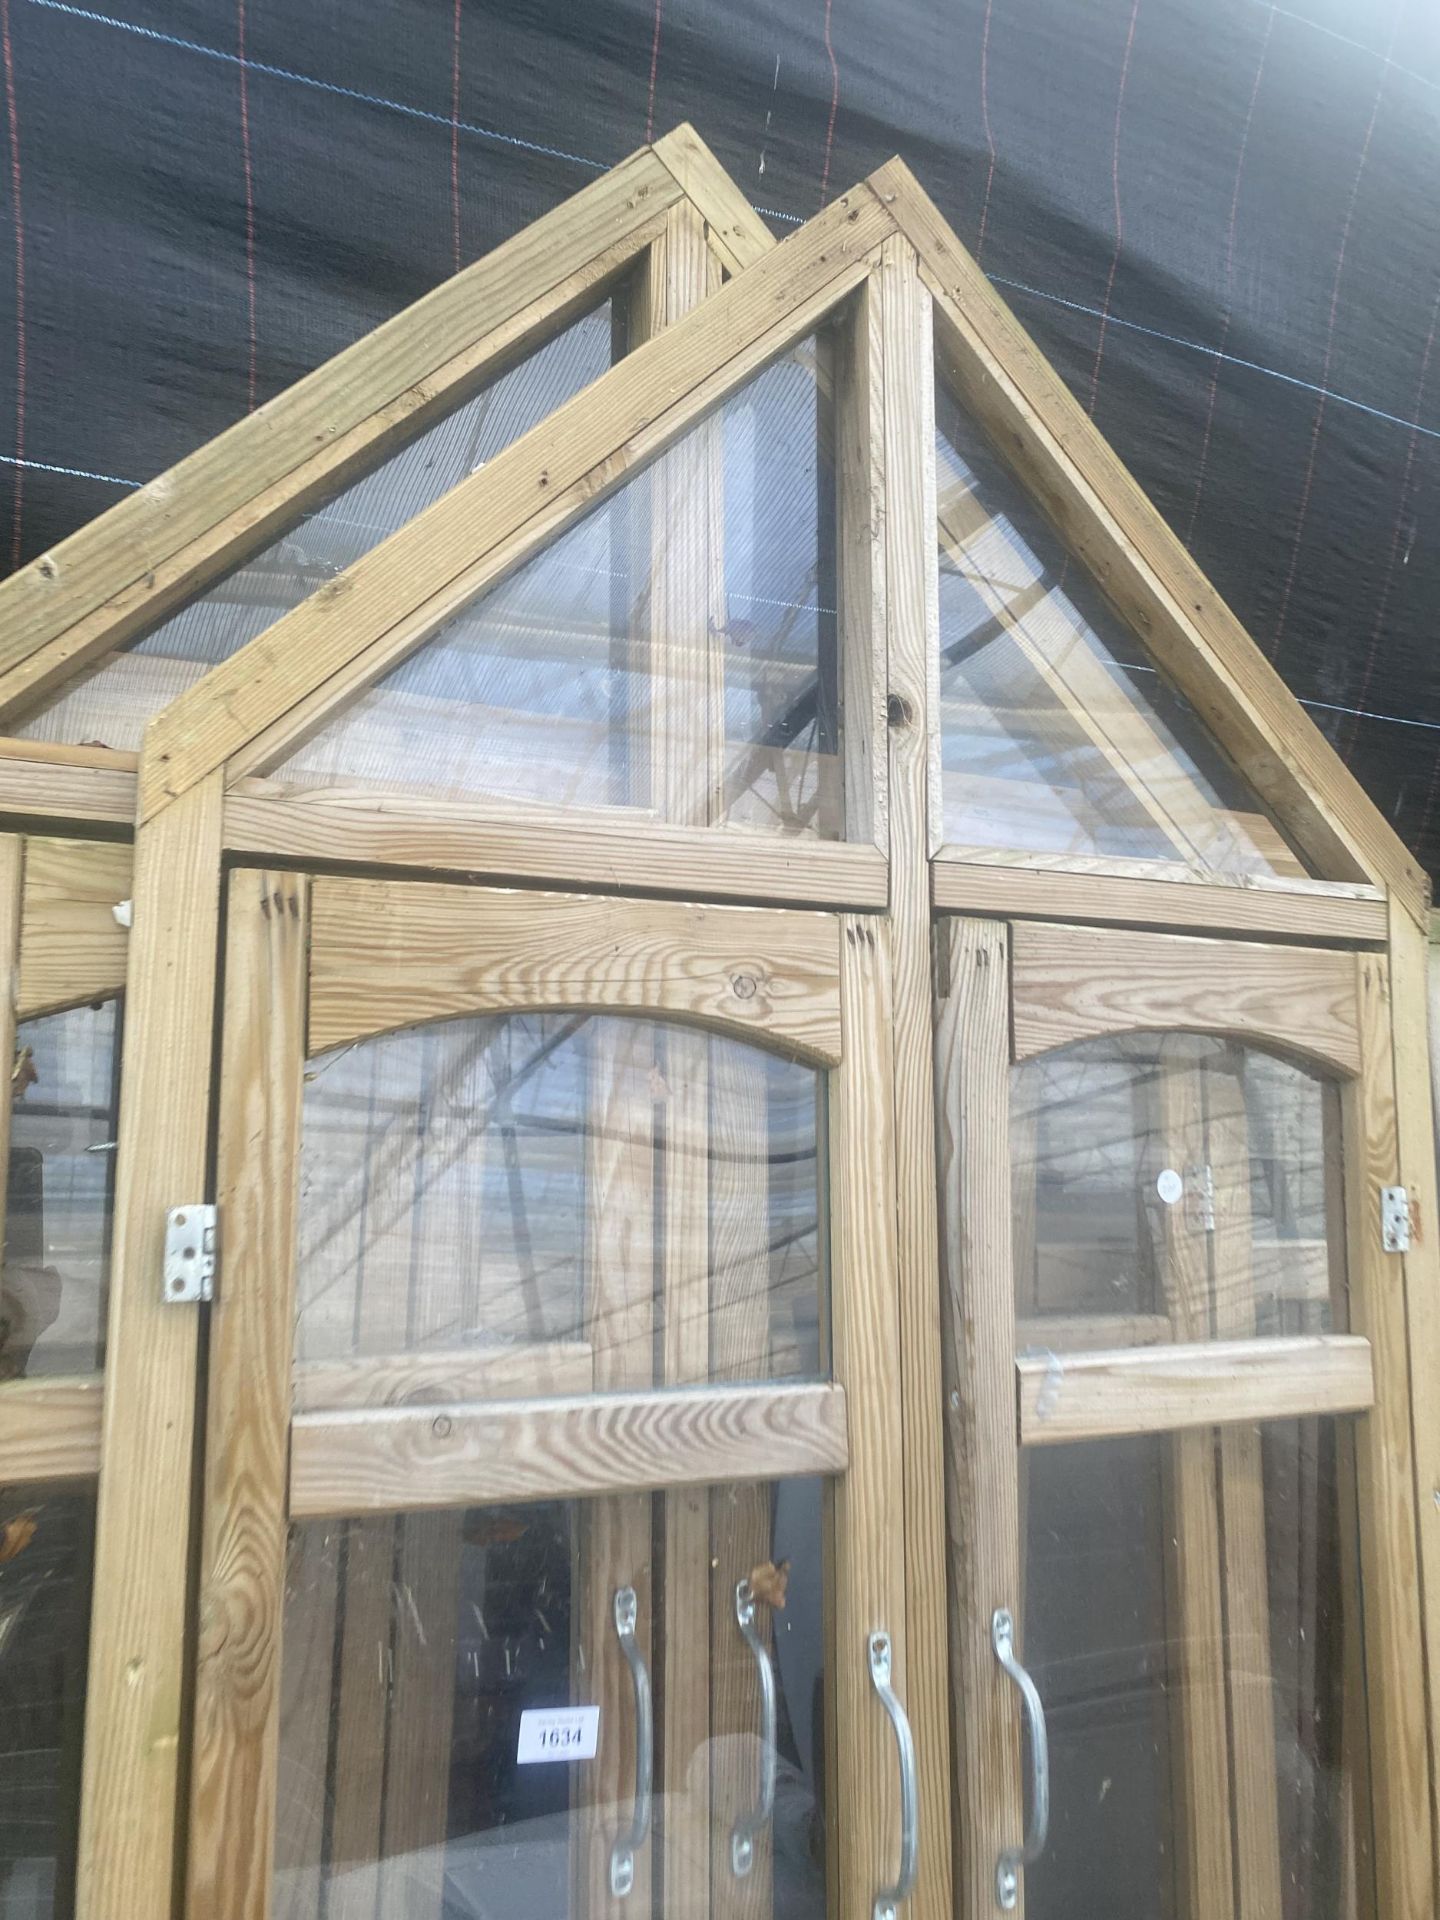 A WOODEN FRAMED GARDEN GREENHOUSE - Image 2 of 5